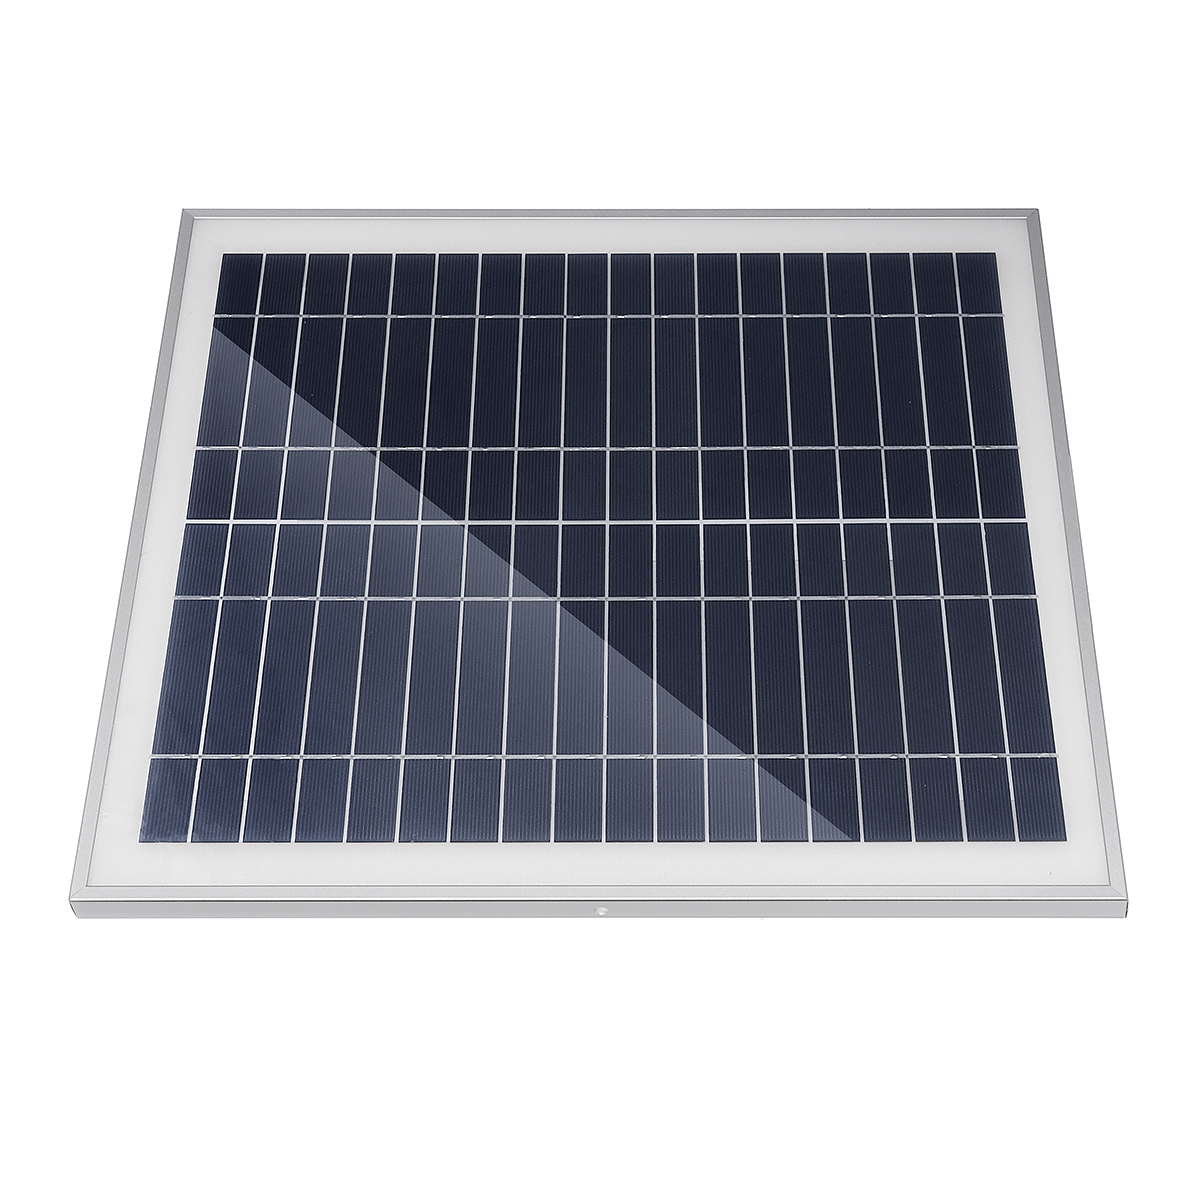 25W-Portable-Solar-Panel-Kit-DC-USB-Charging-Double-USB-Port-Suction-Cups-Camping-Traveling-1383680-5